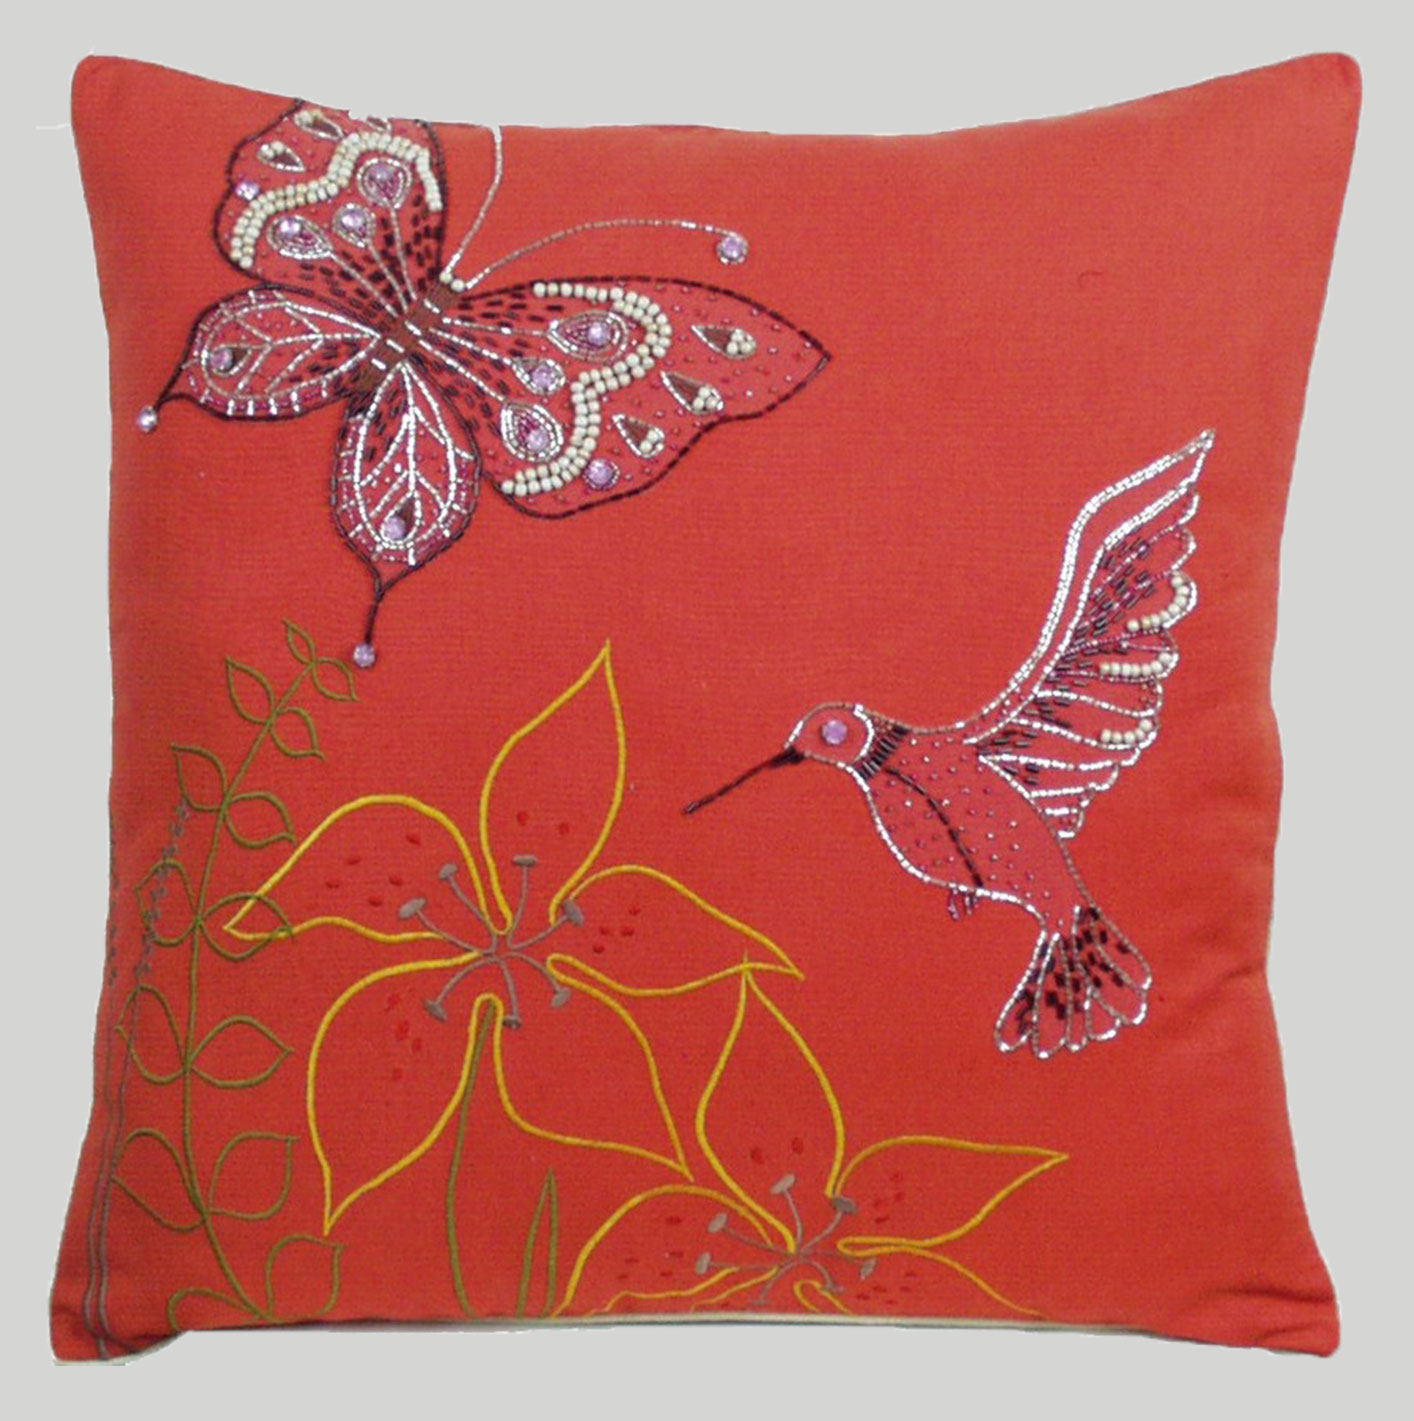 Anthropologie Butterfly Cushion Collection on Linen